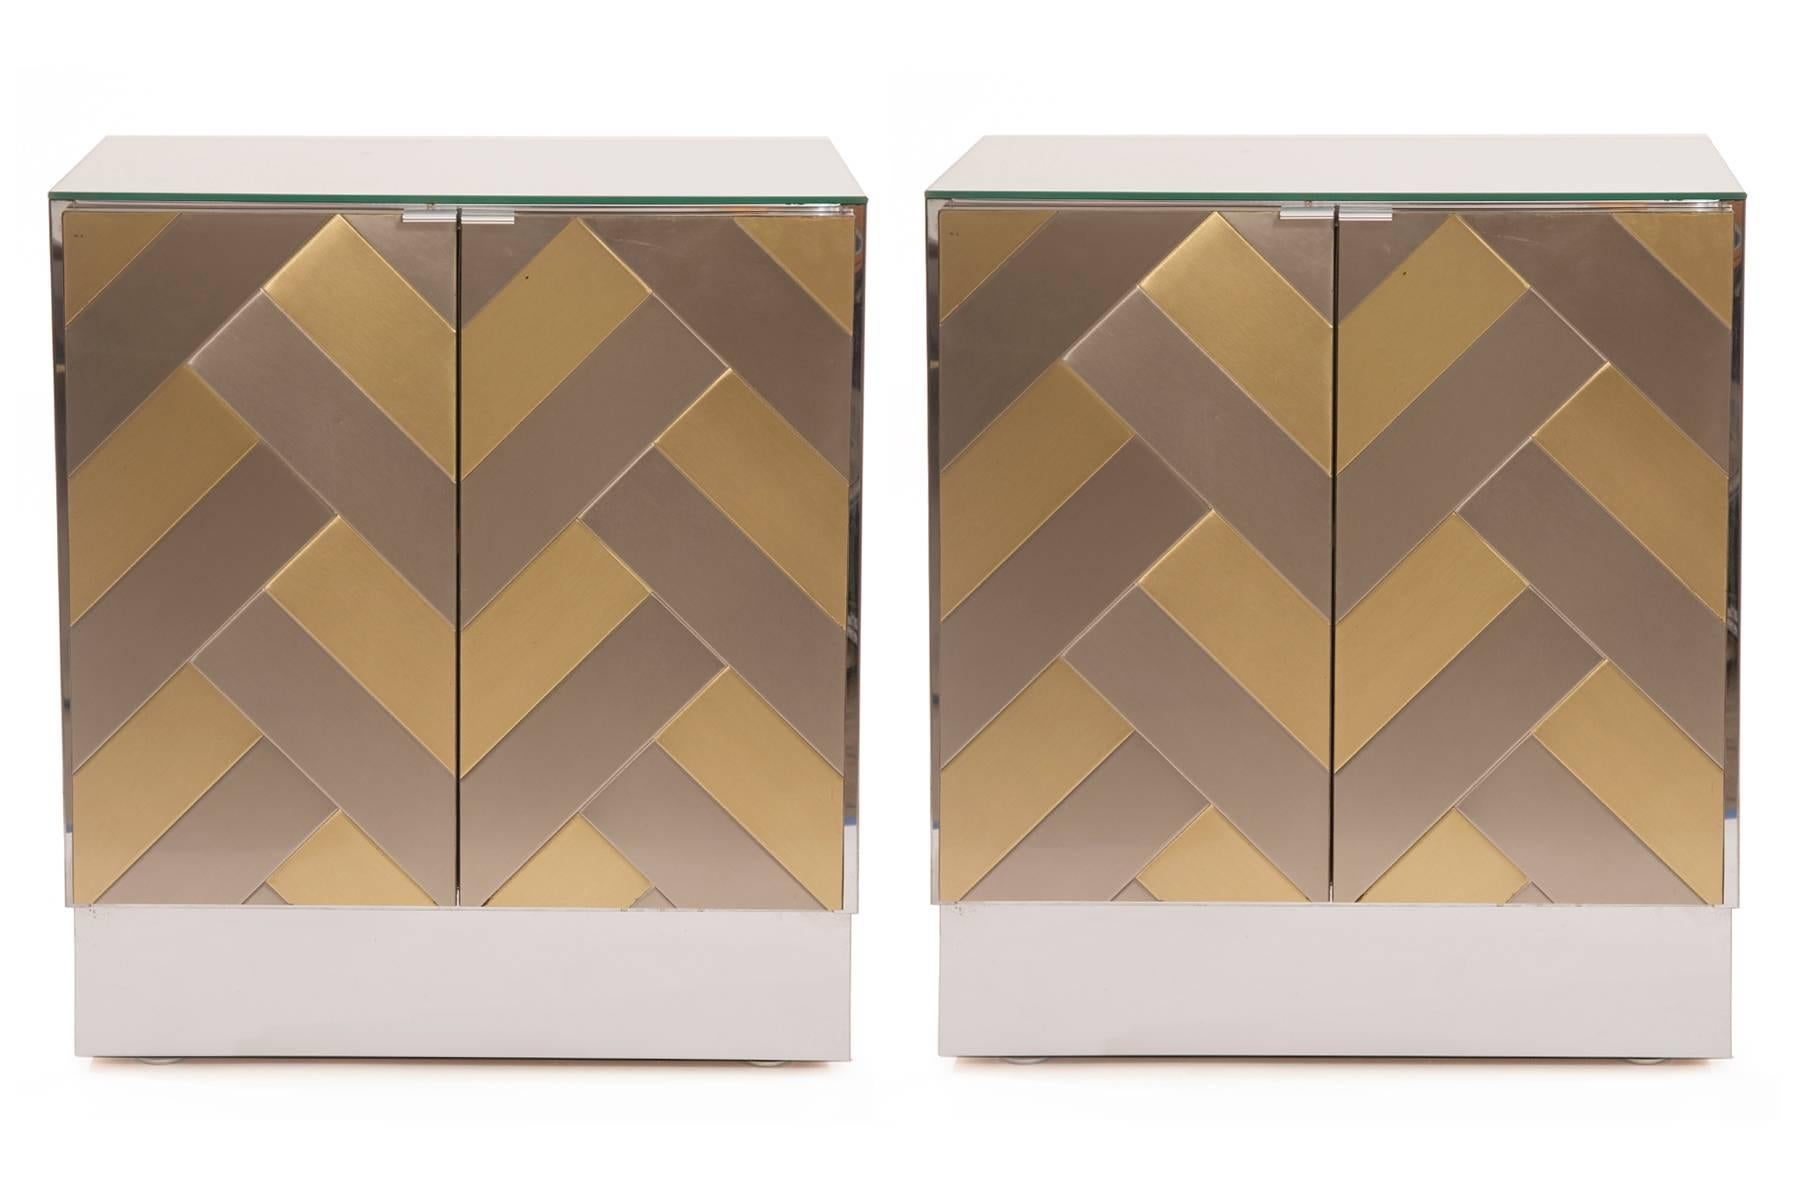 Pair of Ello mirrored nightstands, circa mid-1970s. These examples have brass and chrome Chevron doors with mirrored plinth bases sides and tops. Price listed is for the pair. Some patina to brass and chrome.